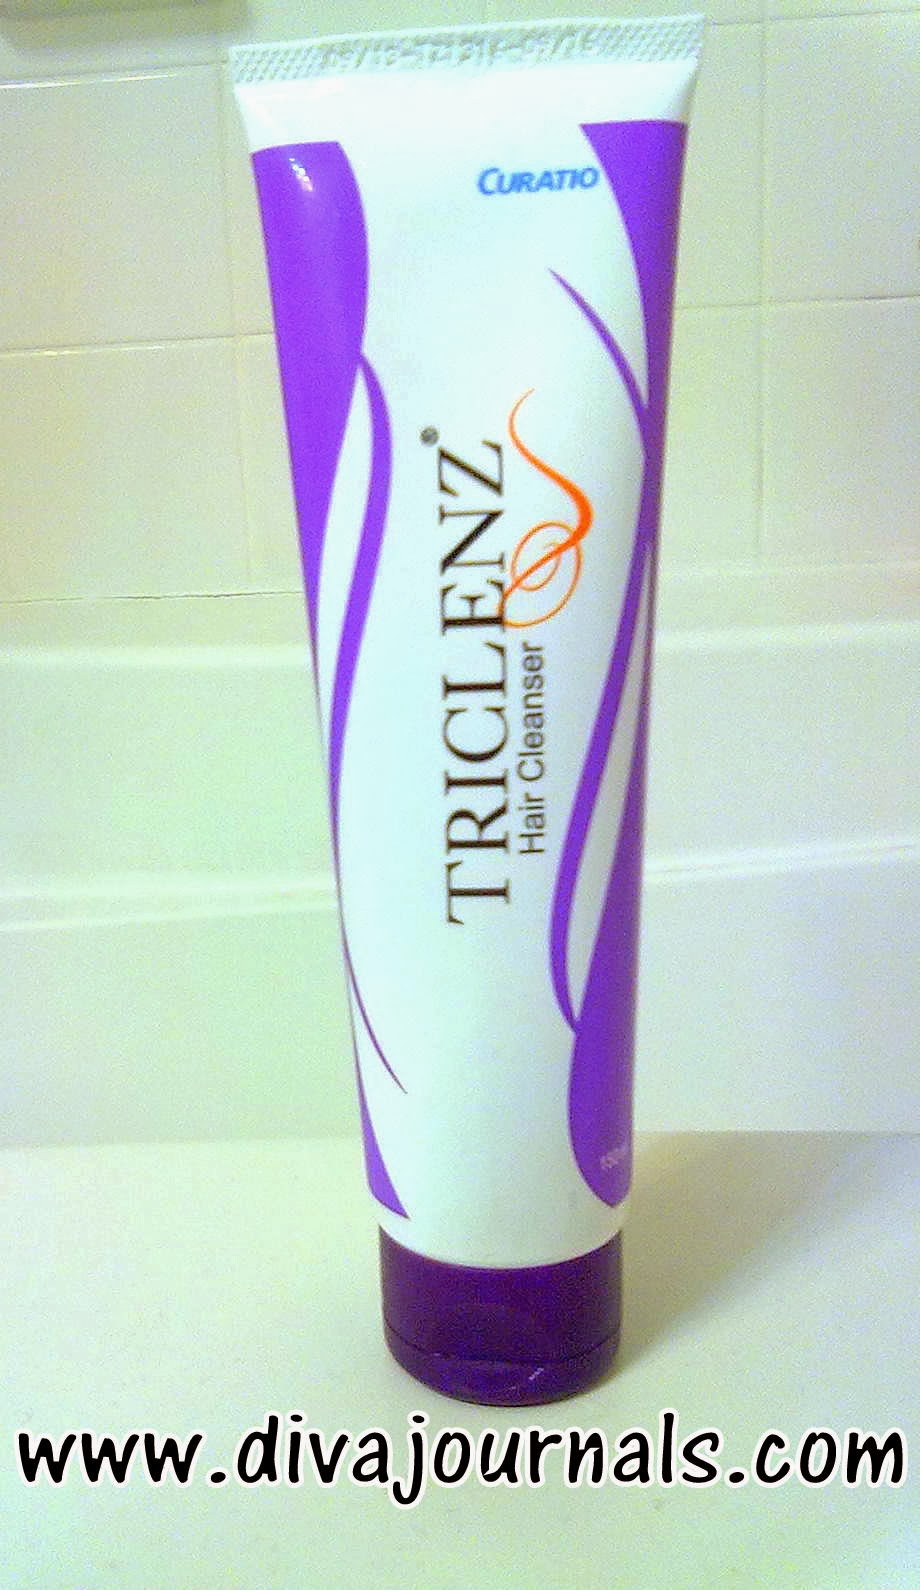 Triclenz Hair Cleanser and Triflow Conditioner Review